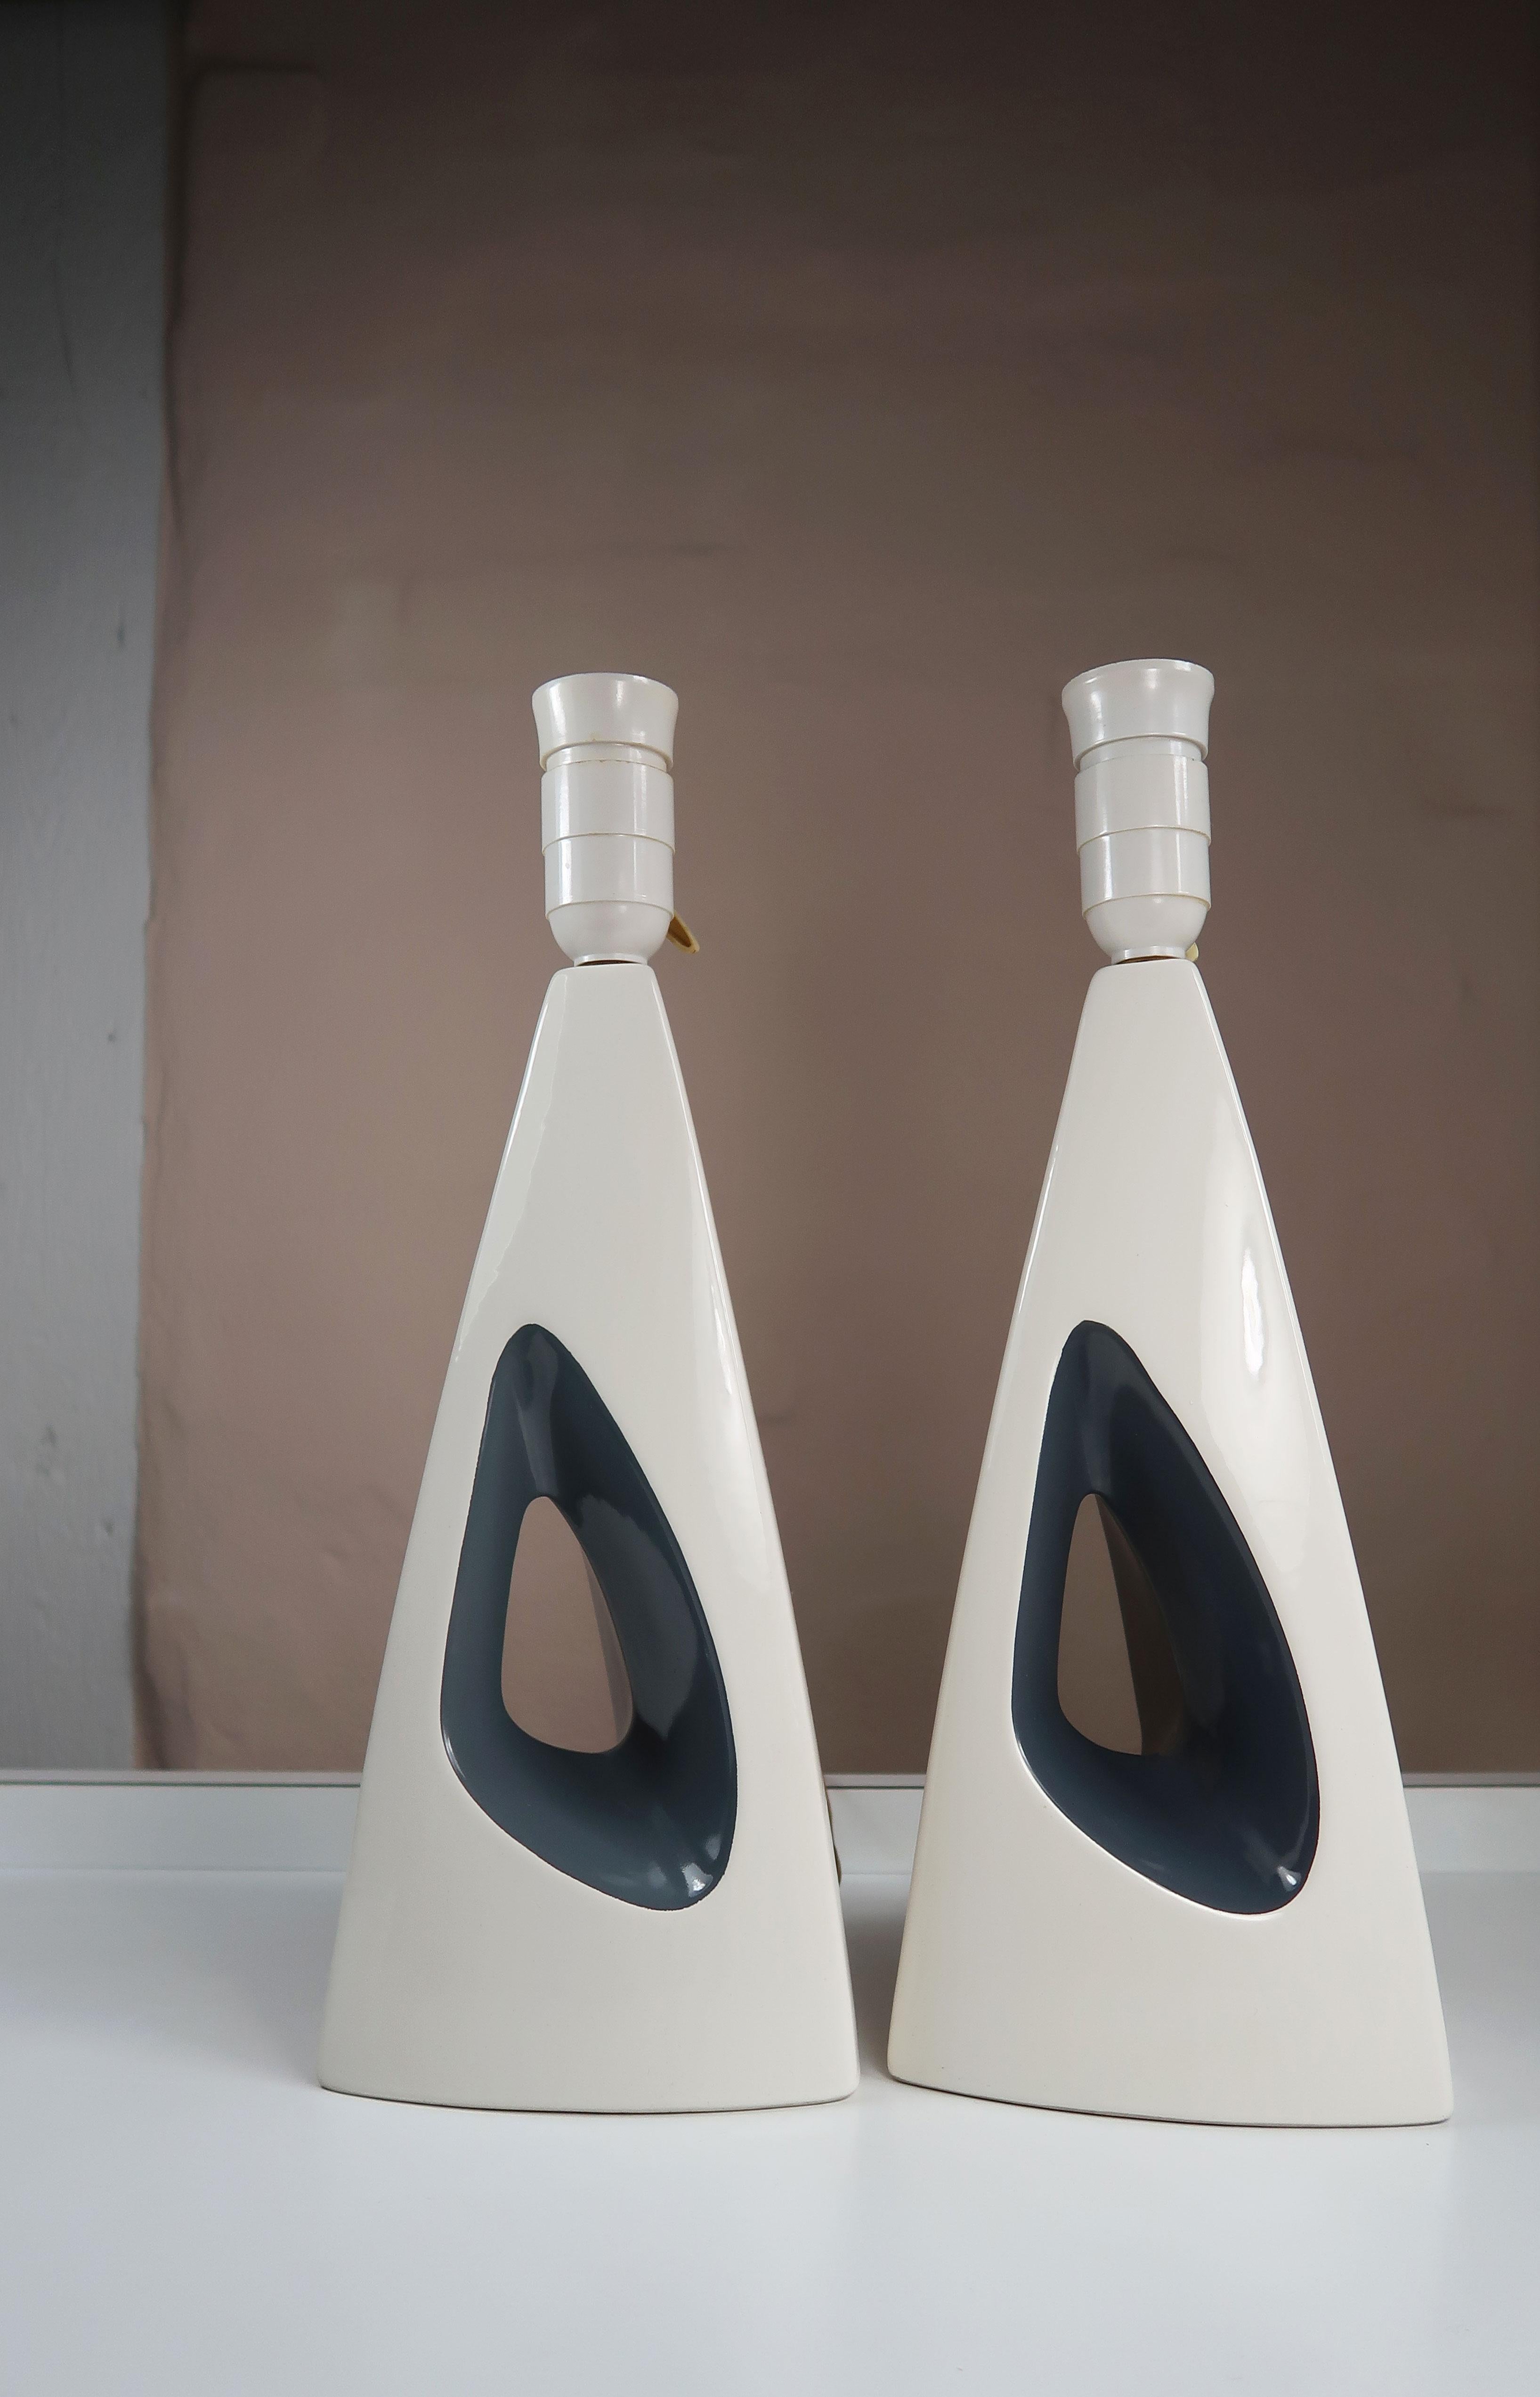 20th Century Søholm 1960s Minimalist White, Anthracite Porcelain Table Lamps For Sale